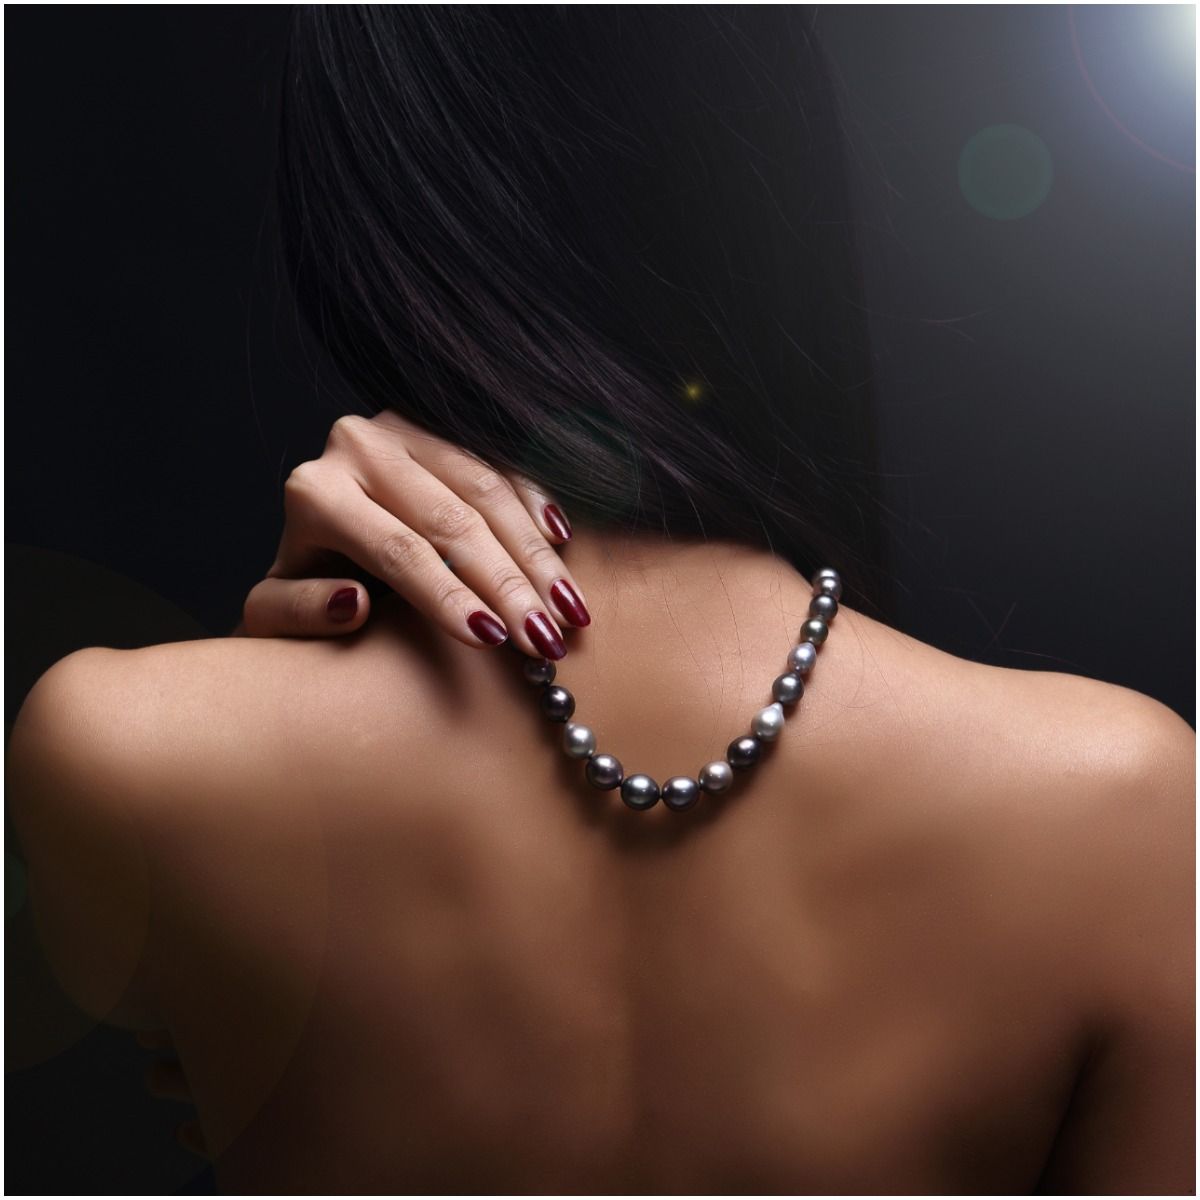 History Of Dreaming Of Pearls